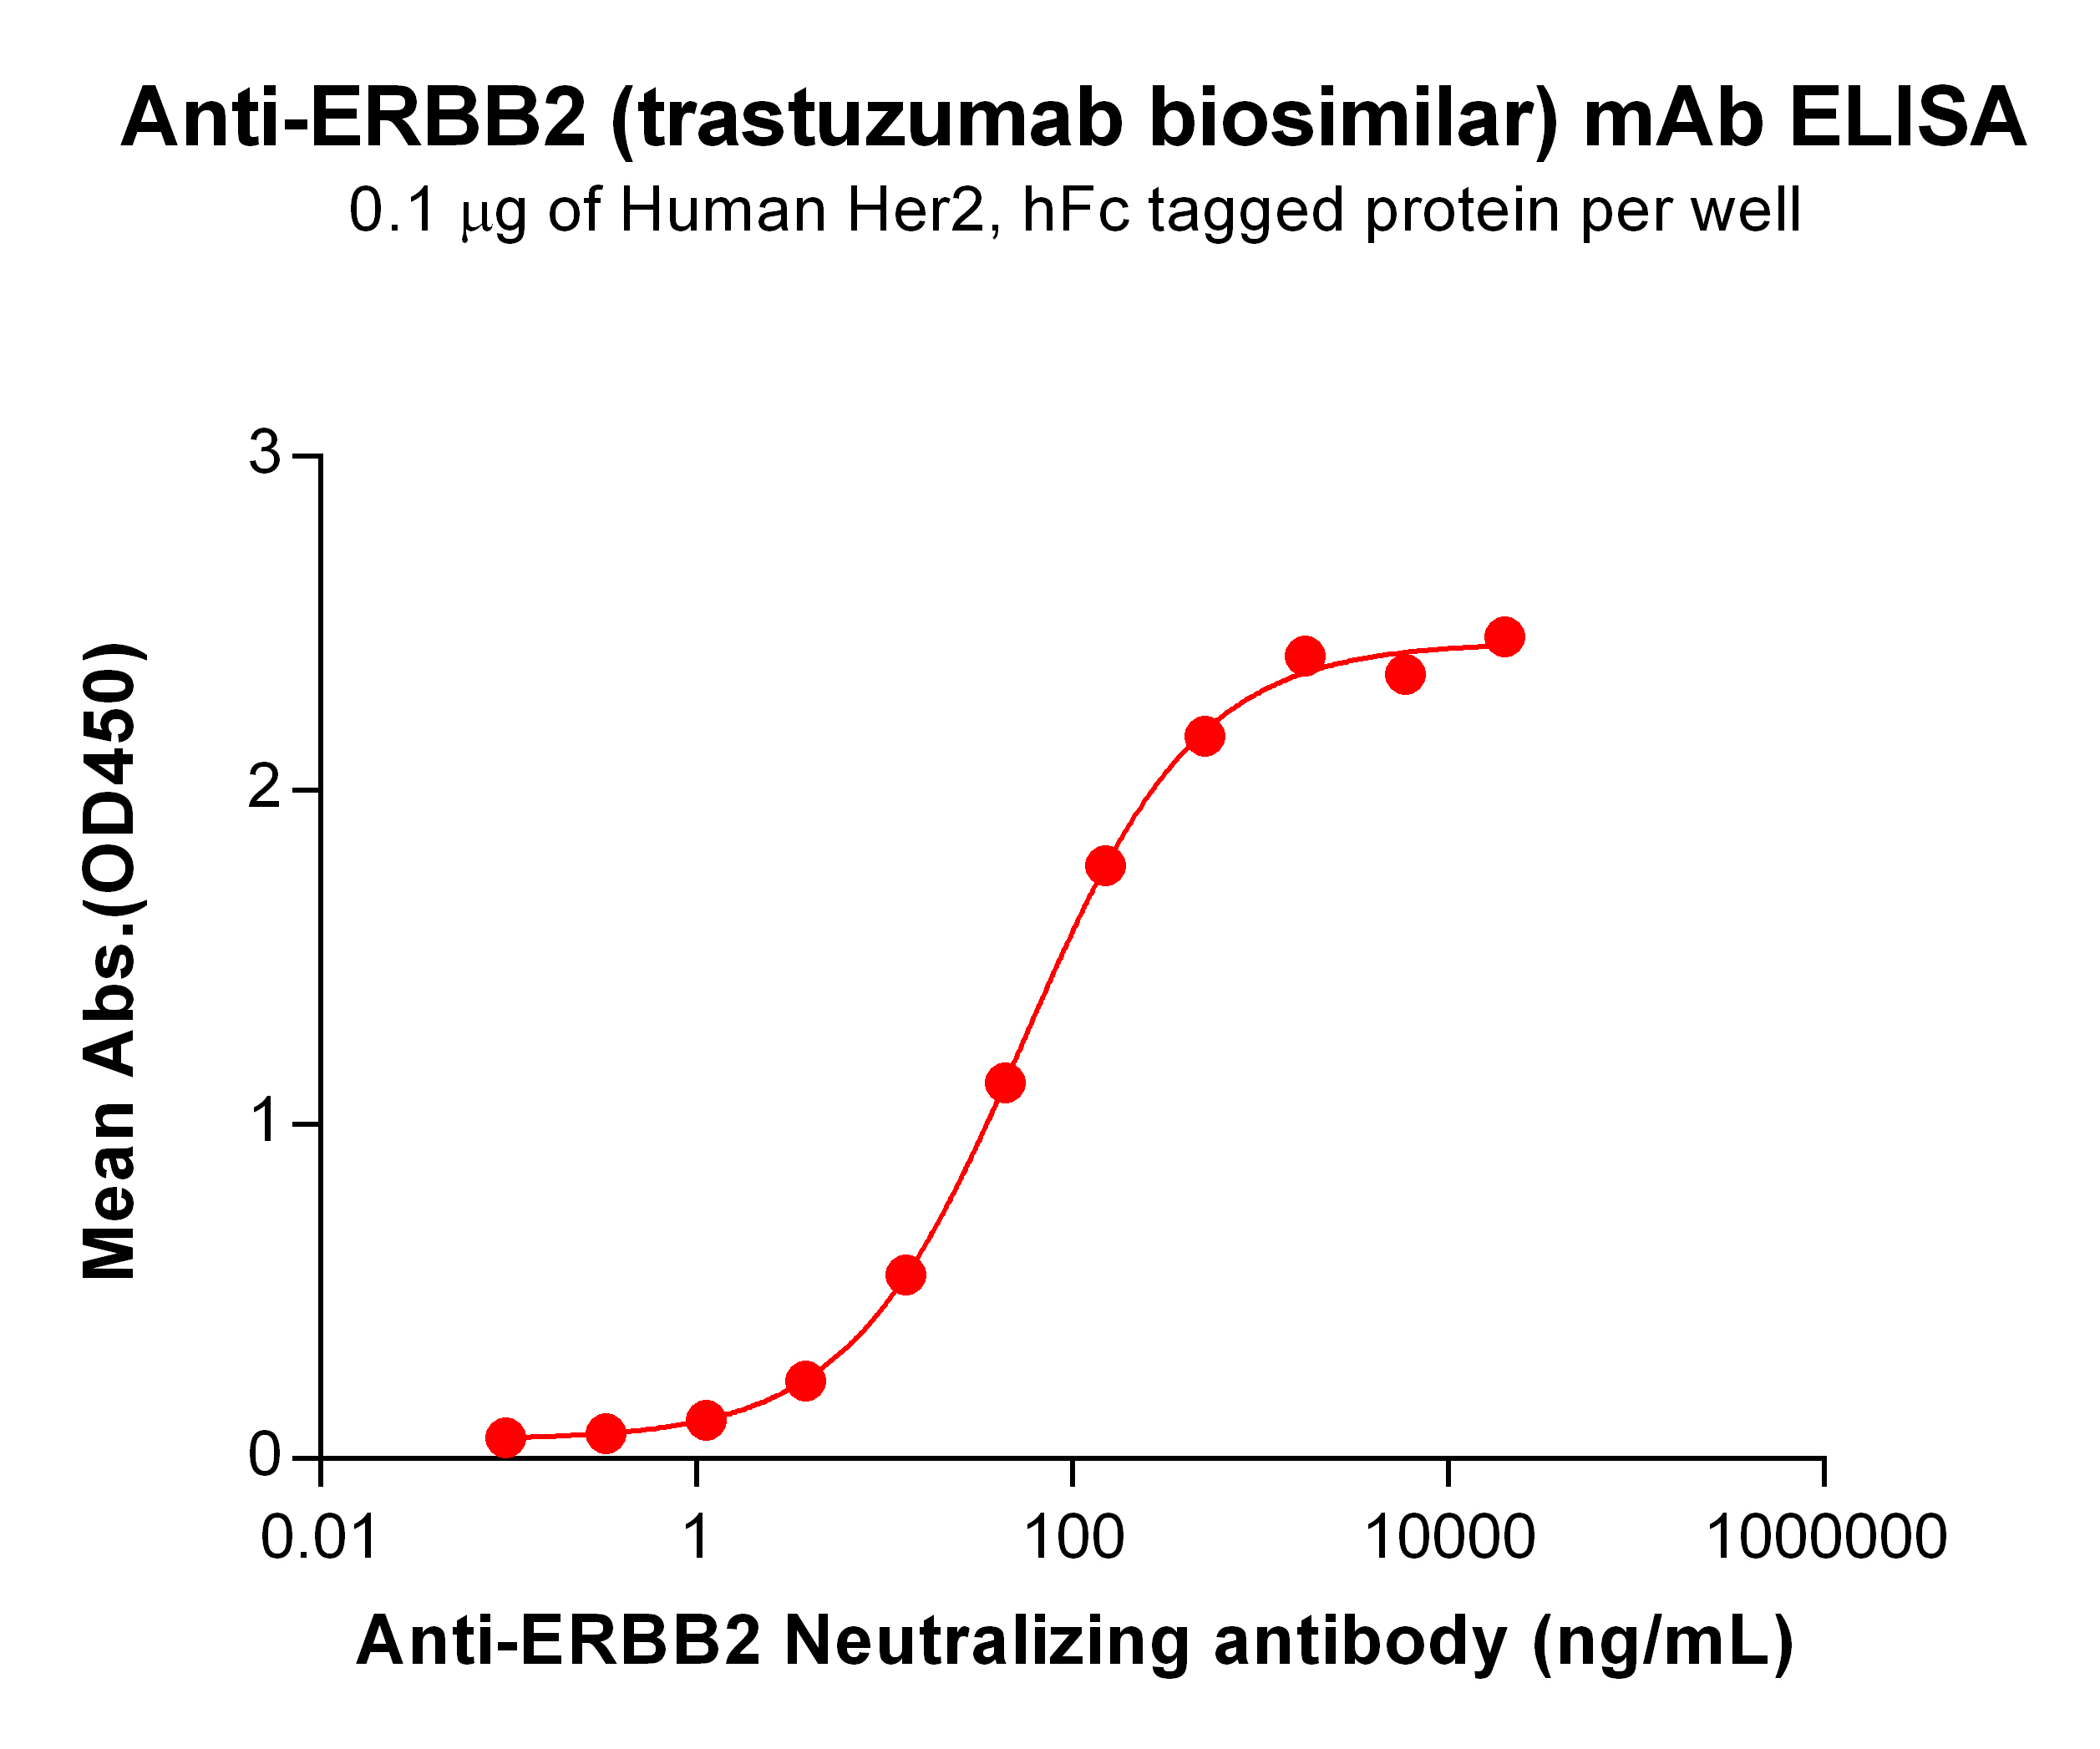 Figure 2. ELISA plate pre-coated by 1 µg/mL (100 µL/well) Human Her2 Protein, hFc Tag  can bind Anti-Her2 Neutralizing antibody  in a linear range of 3.81-1730.10 ng/mL.